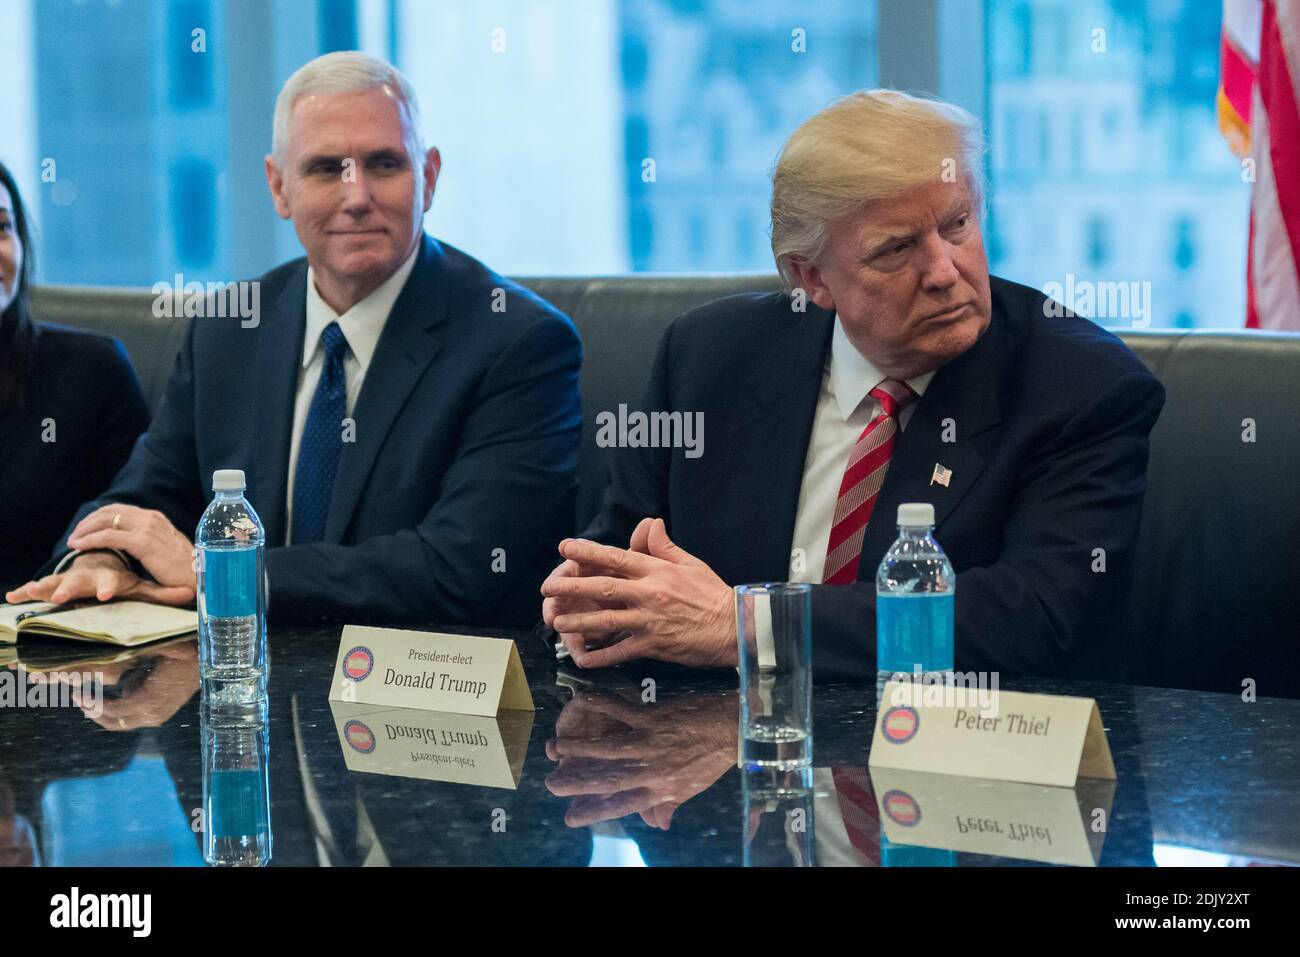 President-elect Donald Trump (R) and Vive President-elect Mike Pence (L) are seen at a meeting of technology leaders in the Trump Organization conference room at Trump Tower in New York, NY, USA on December 14, 2016. Credit: Albin Lohr-Jones / Pool via CNP Stock Photo